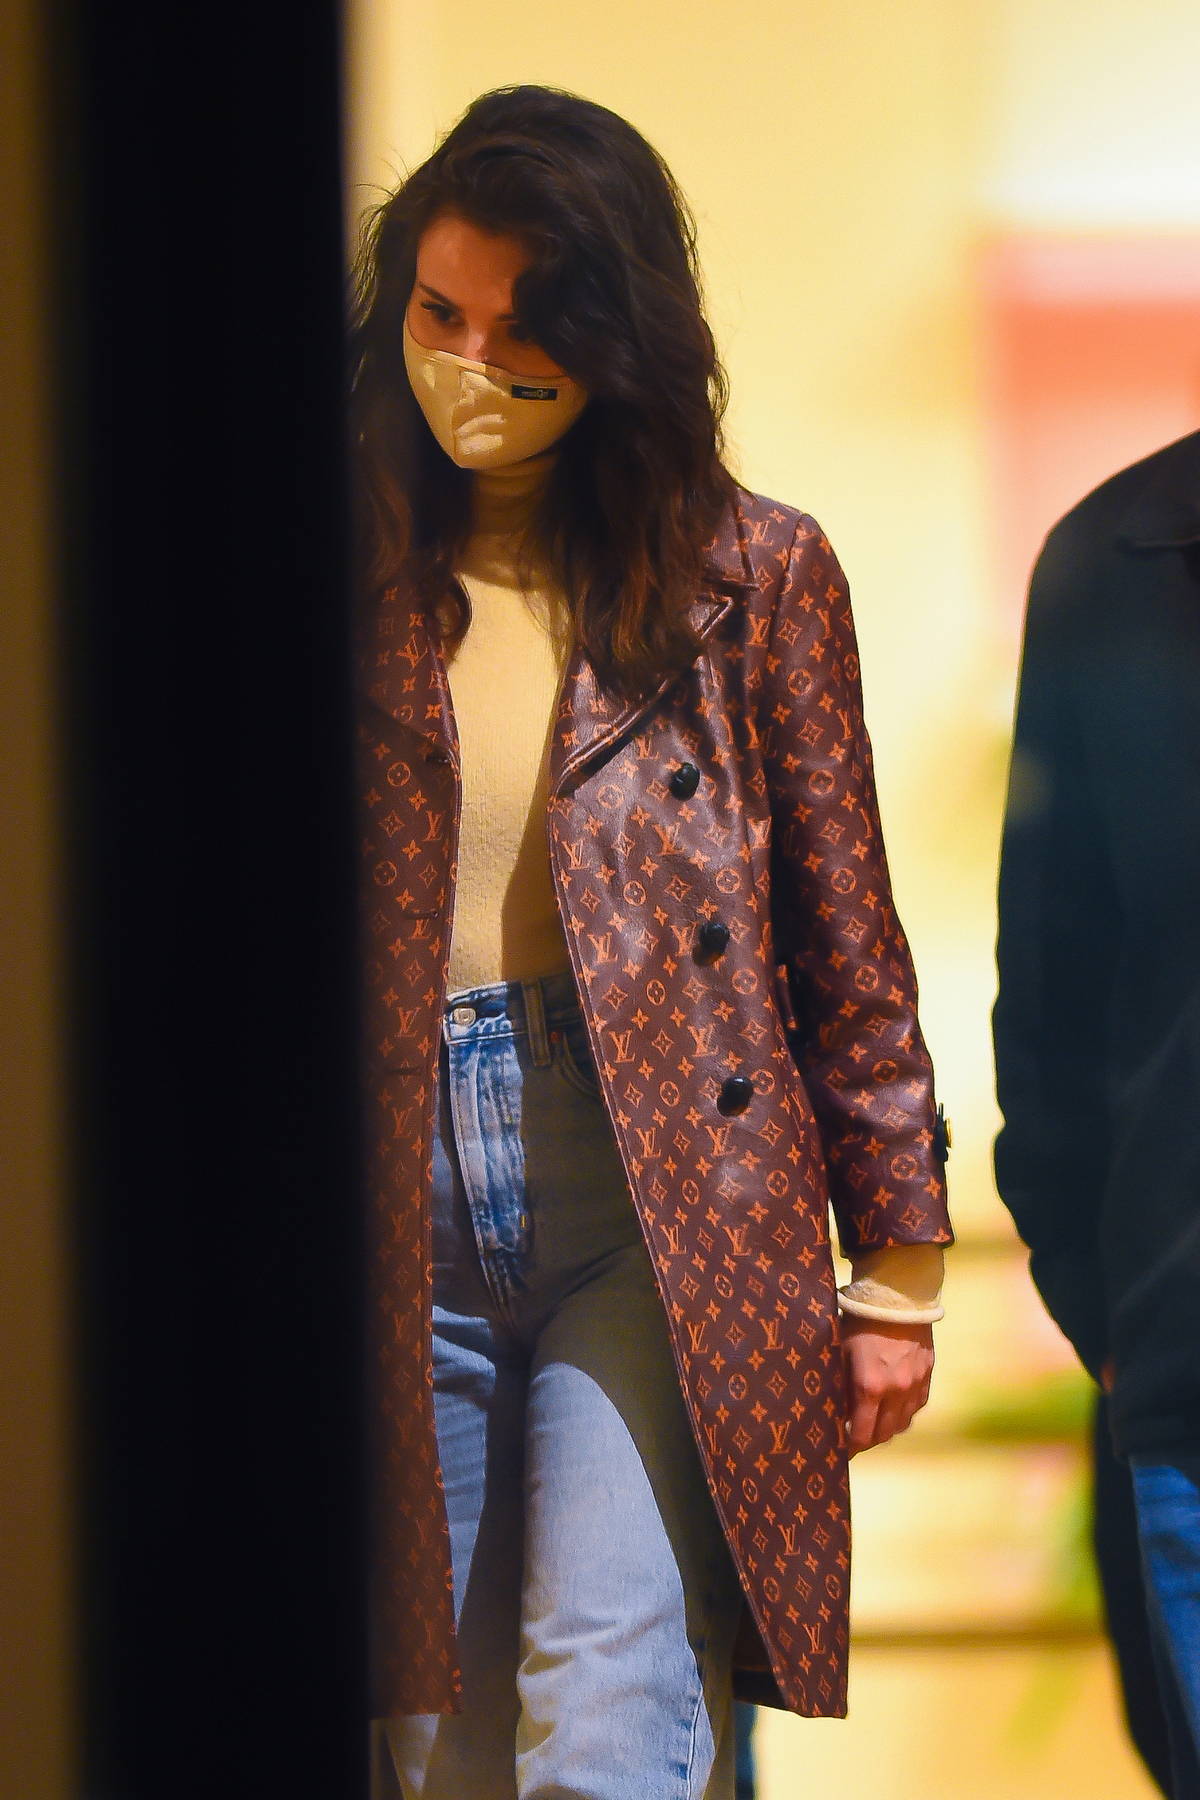 Selena Gomez Layered a Sleek Houndstooth Trench Coat Over a Louis